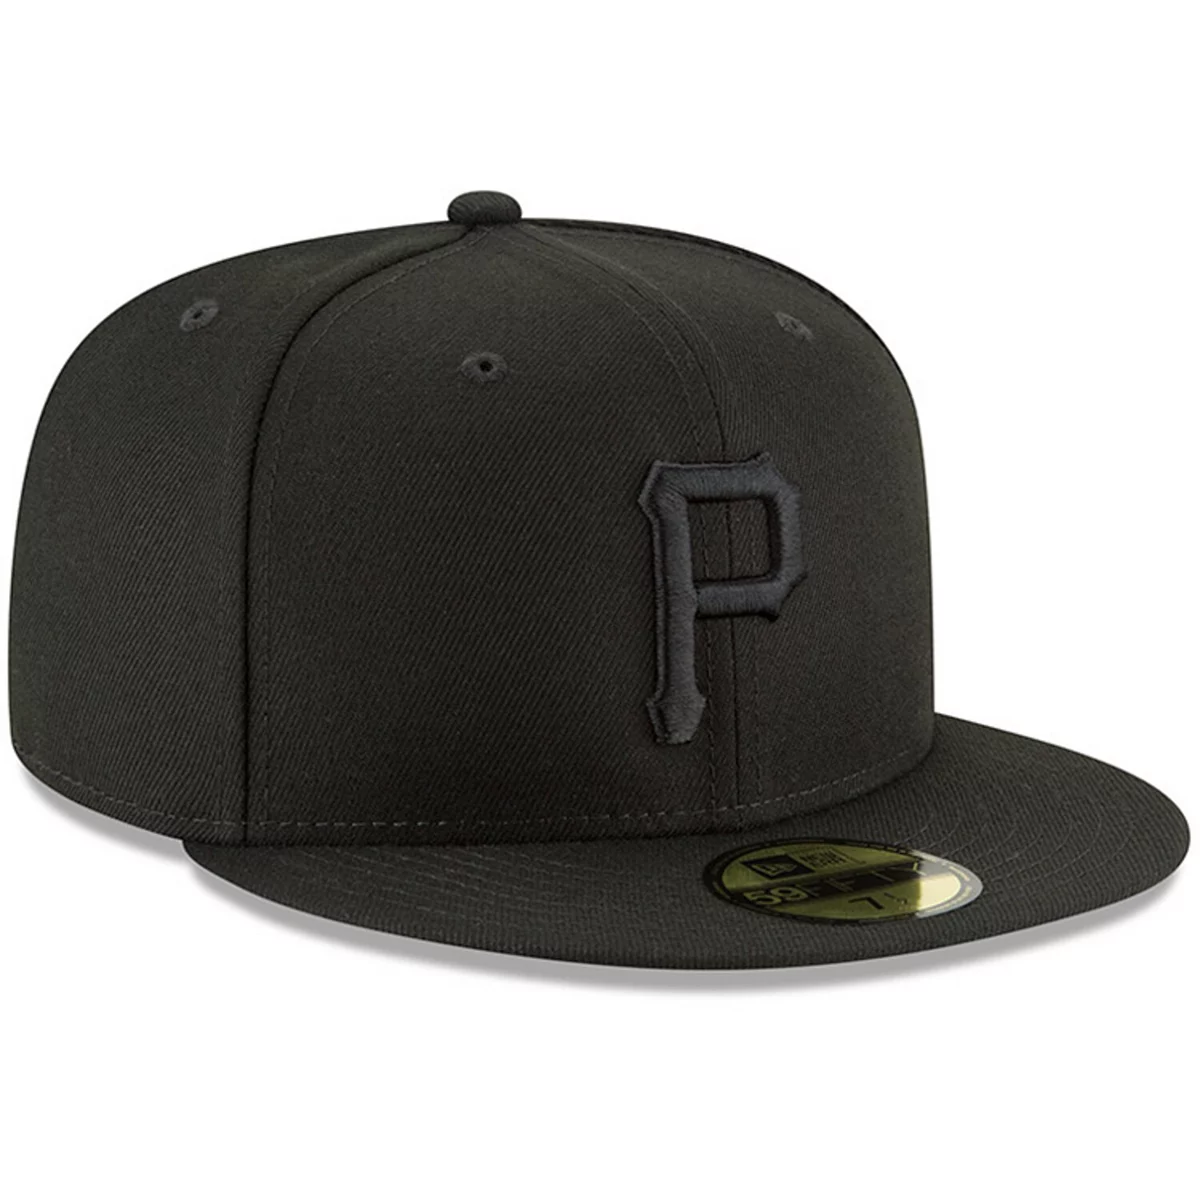 PITTSBURGH PIRATES NEW ERA BASIC COLLECTION FITTED 59FIFTY-BLACK AND BLACK